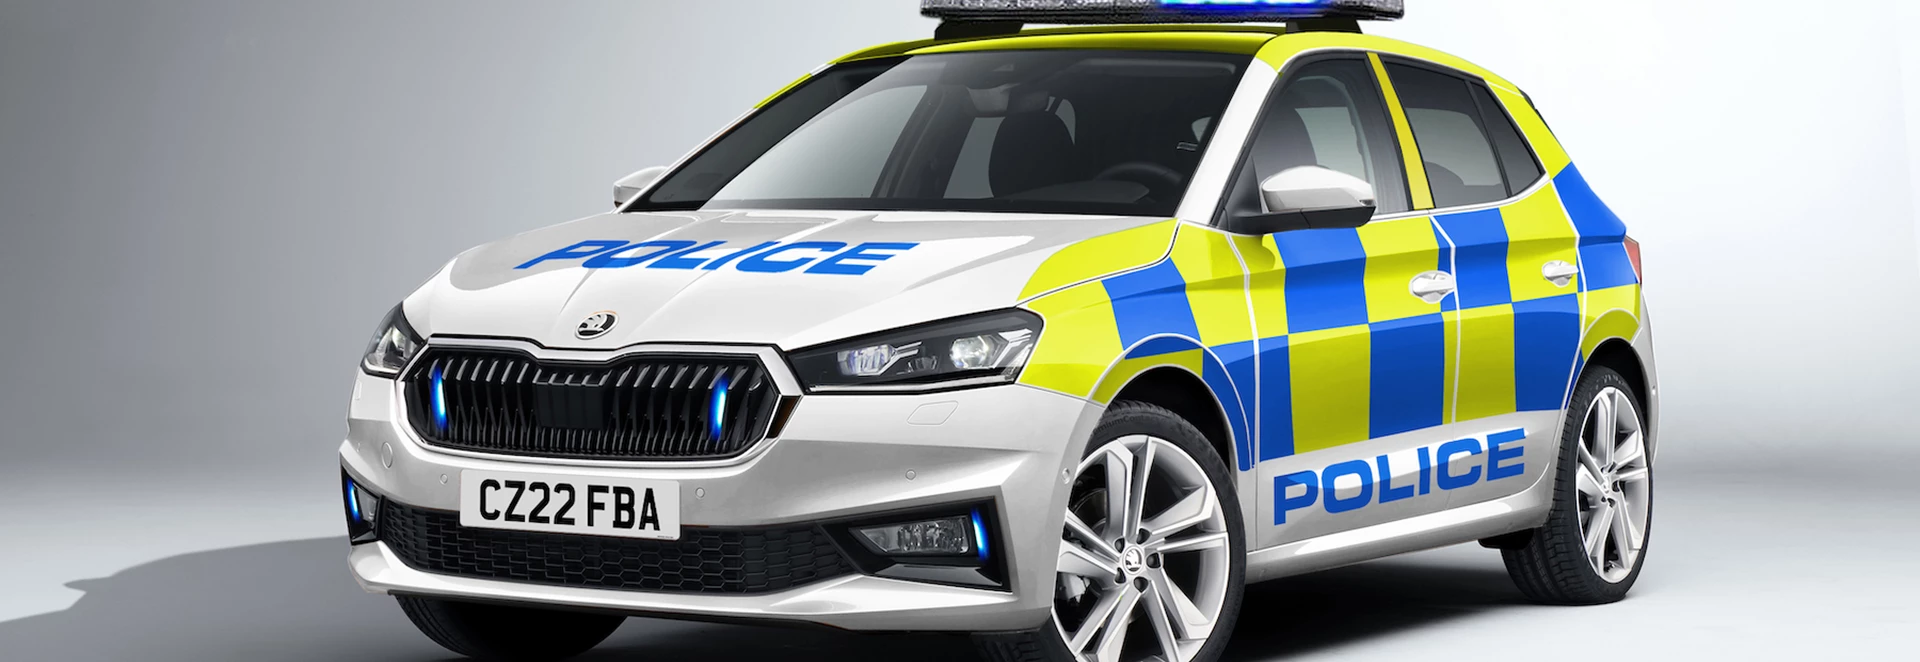 Skoda continues police car tradition with blue light Fabia 